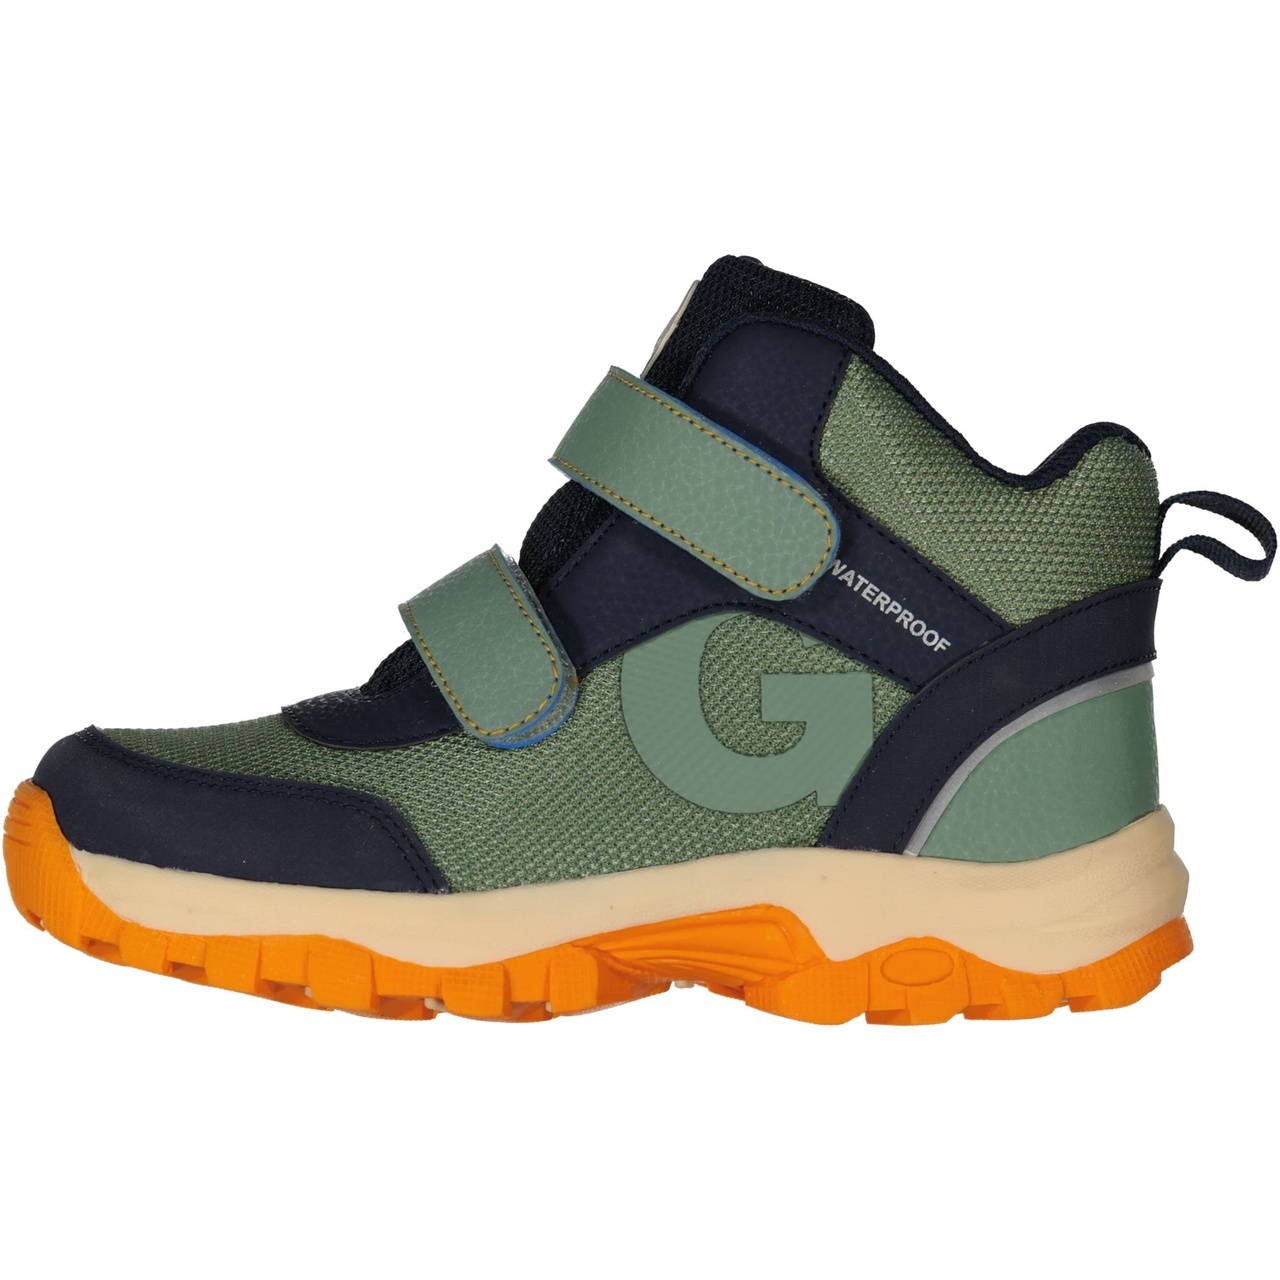 All weather shoes Moss green  25 (16,4 cm)